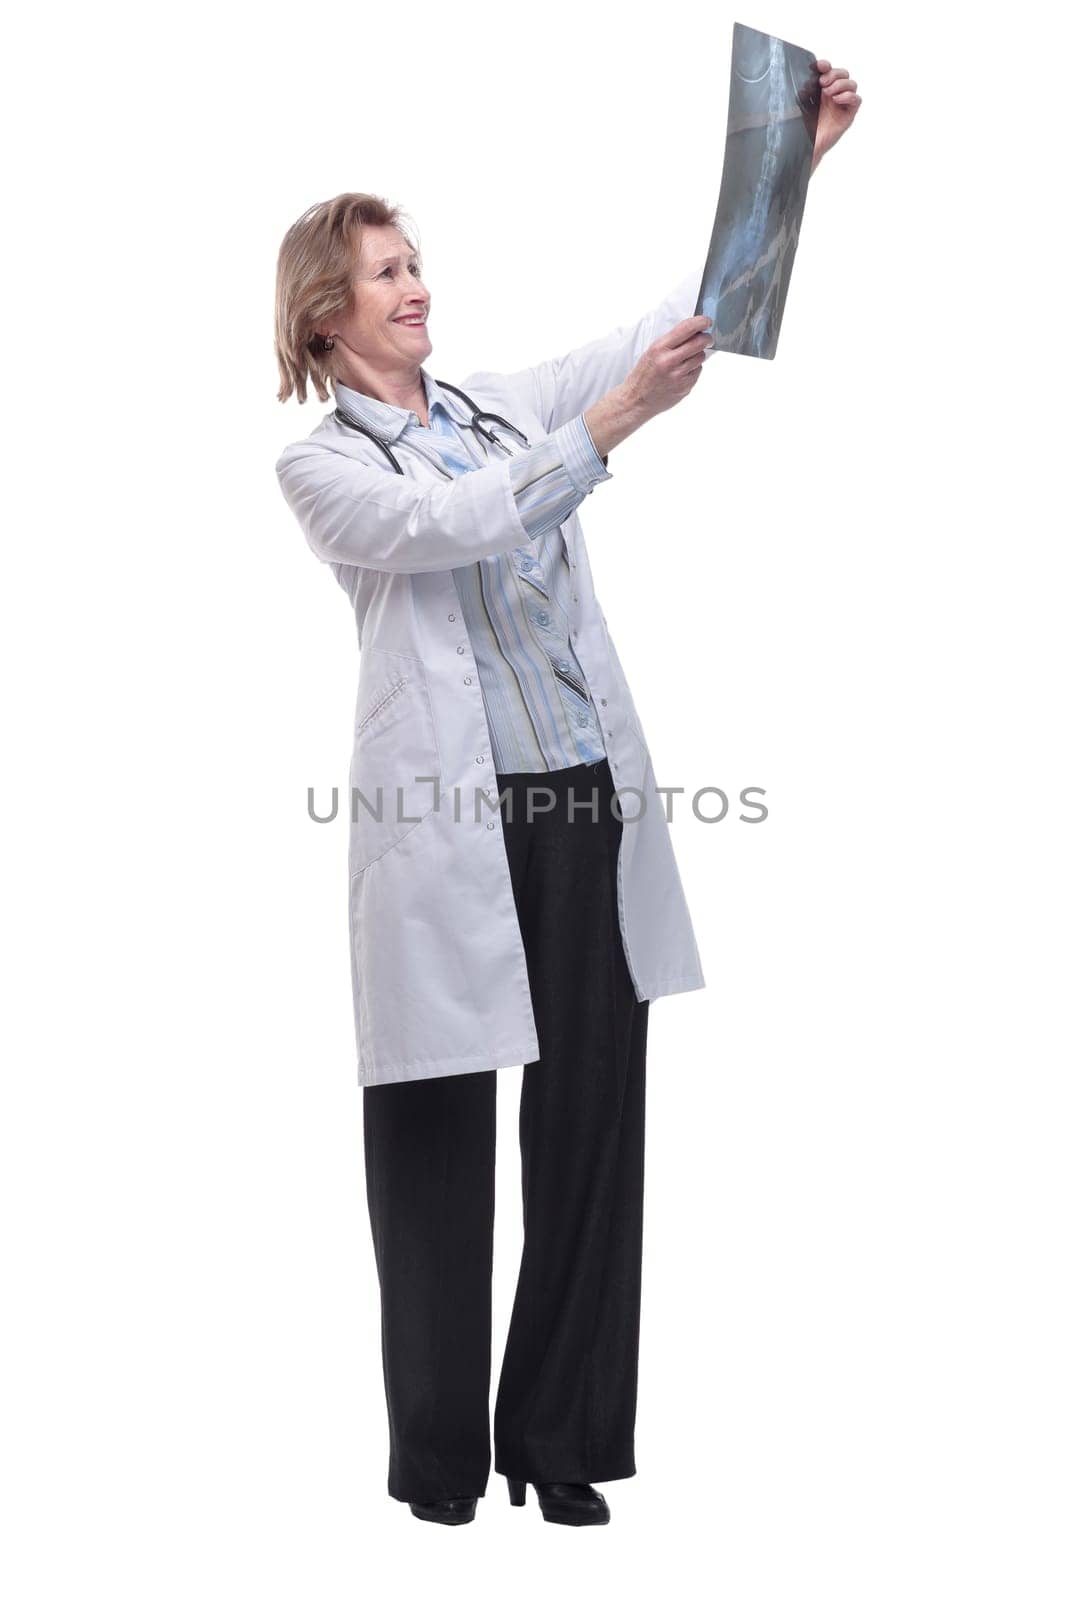 Medical doctor analysing x-ray image looking at camera and smiling by asdf